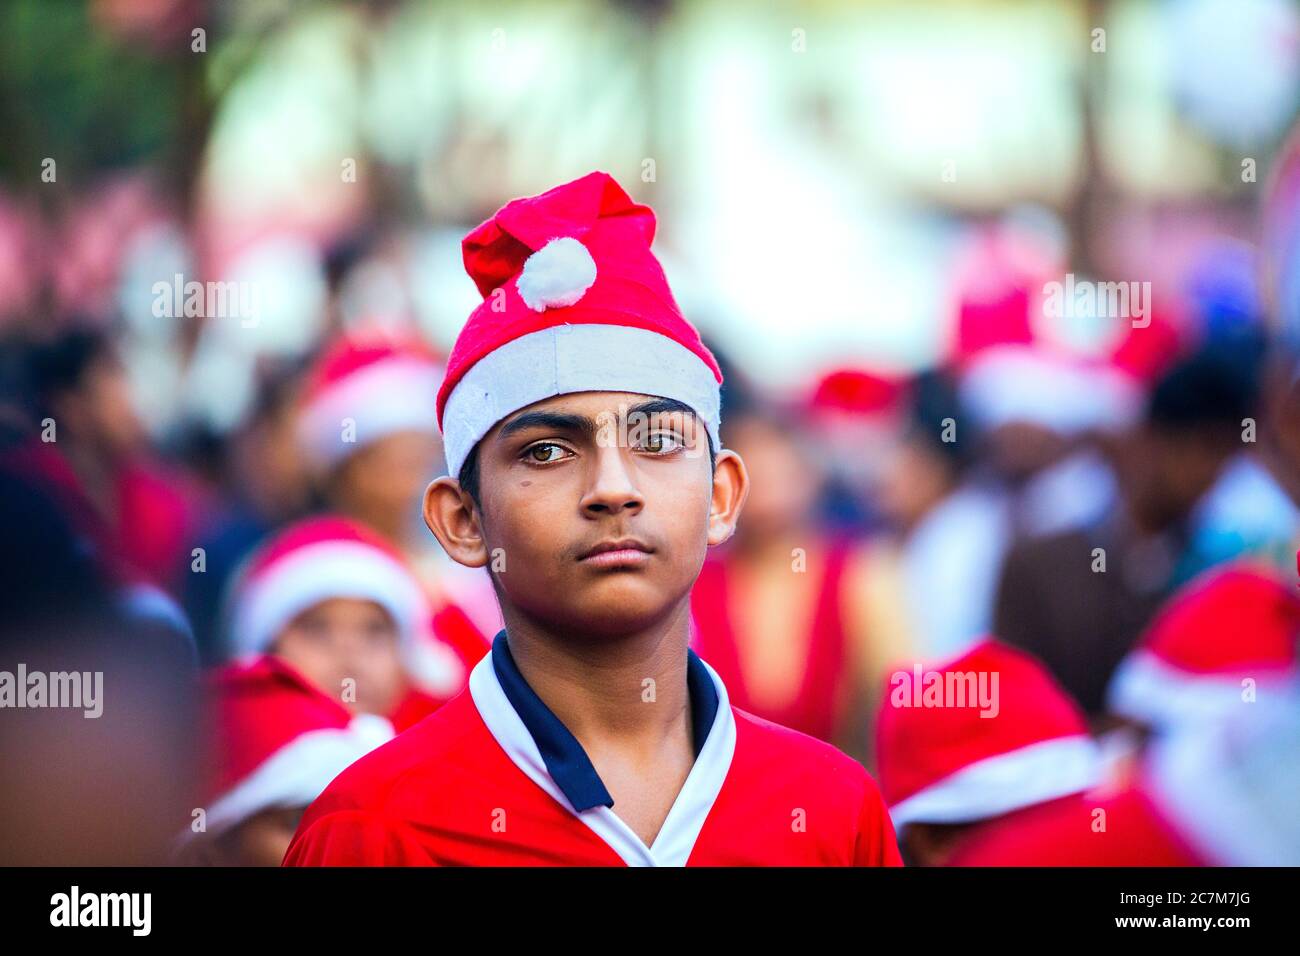 Buon Natale 2020 Thrissur.Thrissur Buon Natale High Resolution Stock Photography And Images Alamy